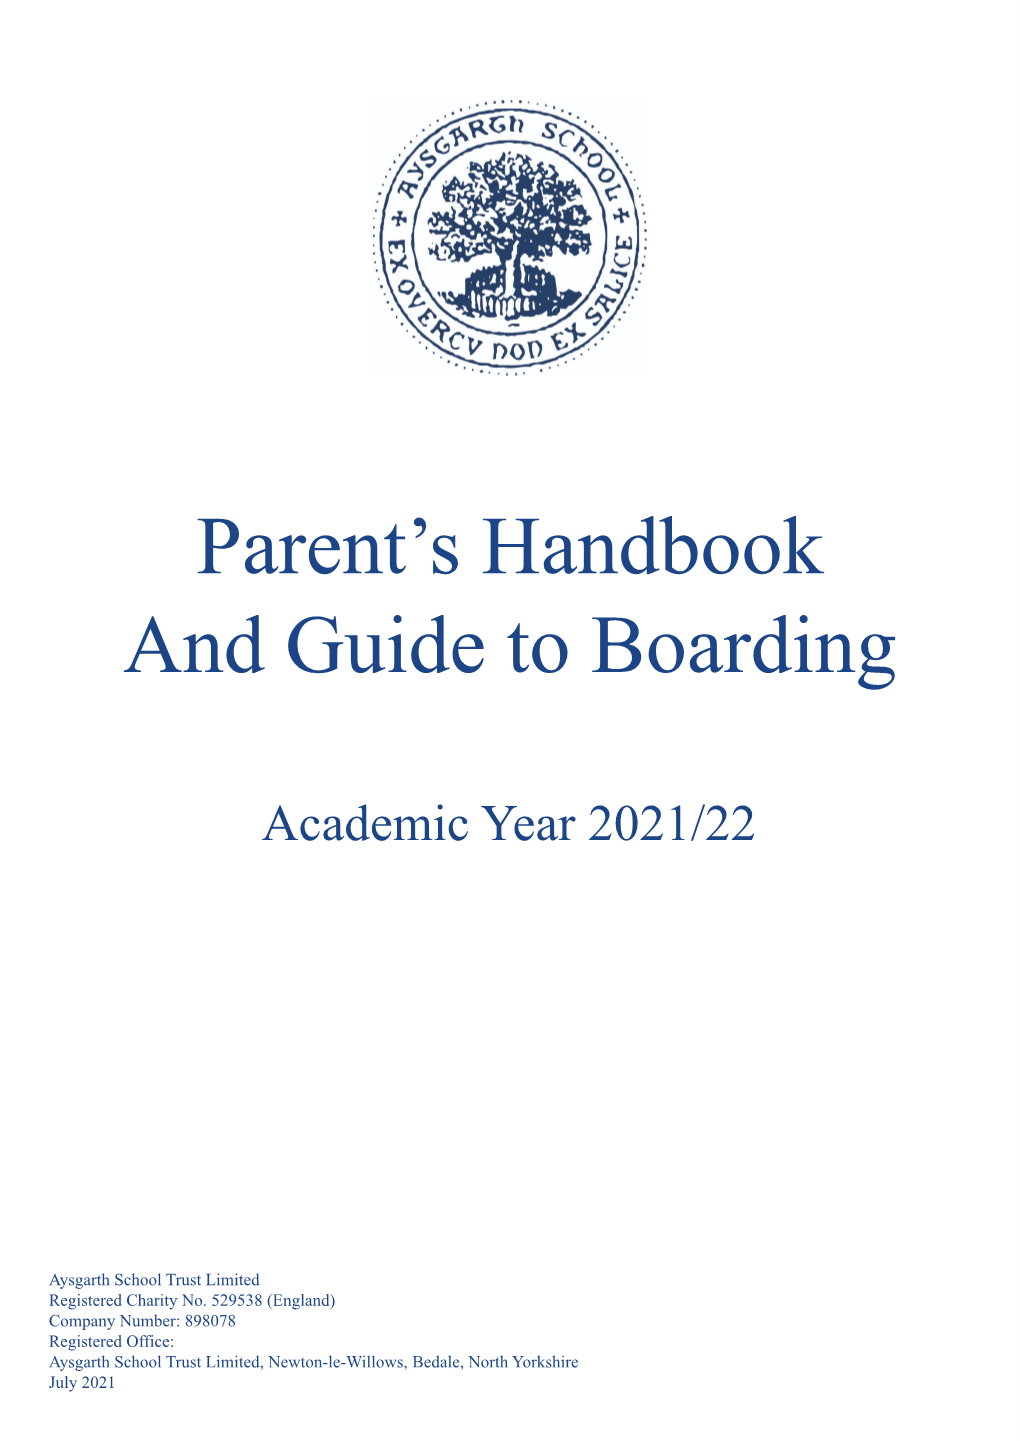 Parents Handbook and a Guide to Boarding